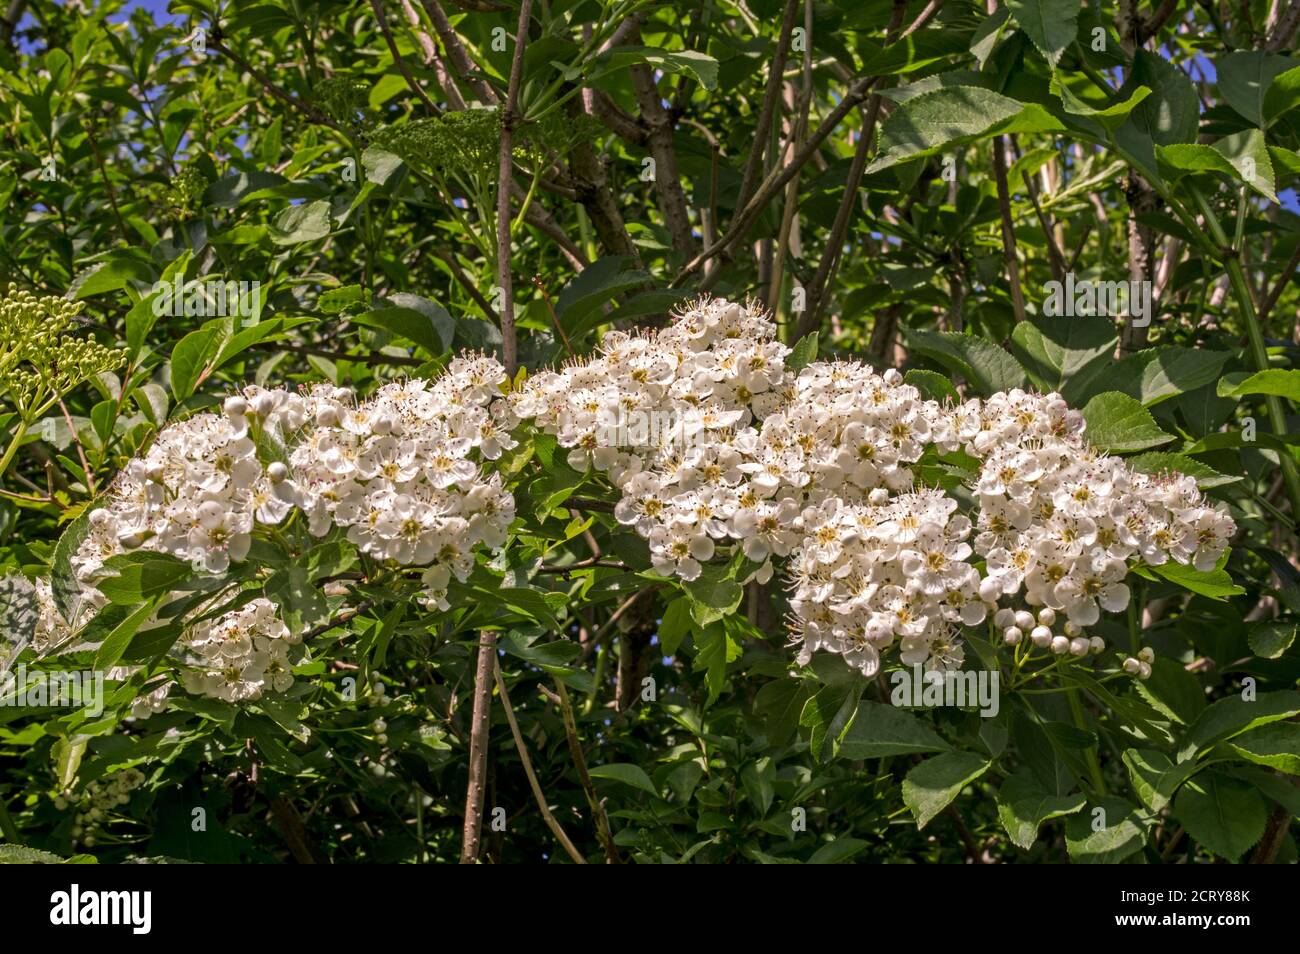 In full flower in late spring, brightening hedge rows and providing nectar for insects. Stock Photo